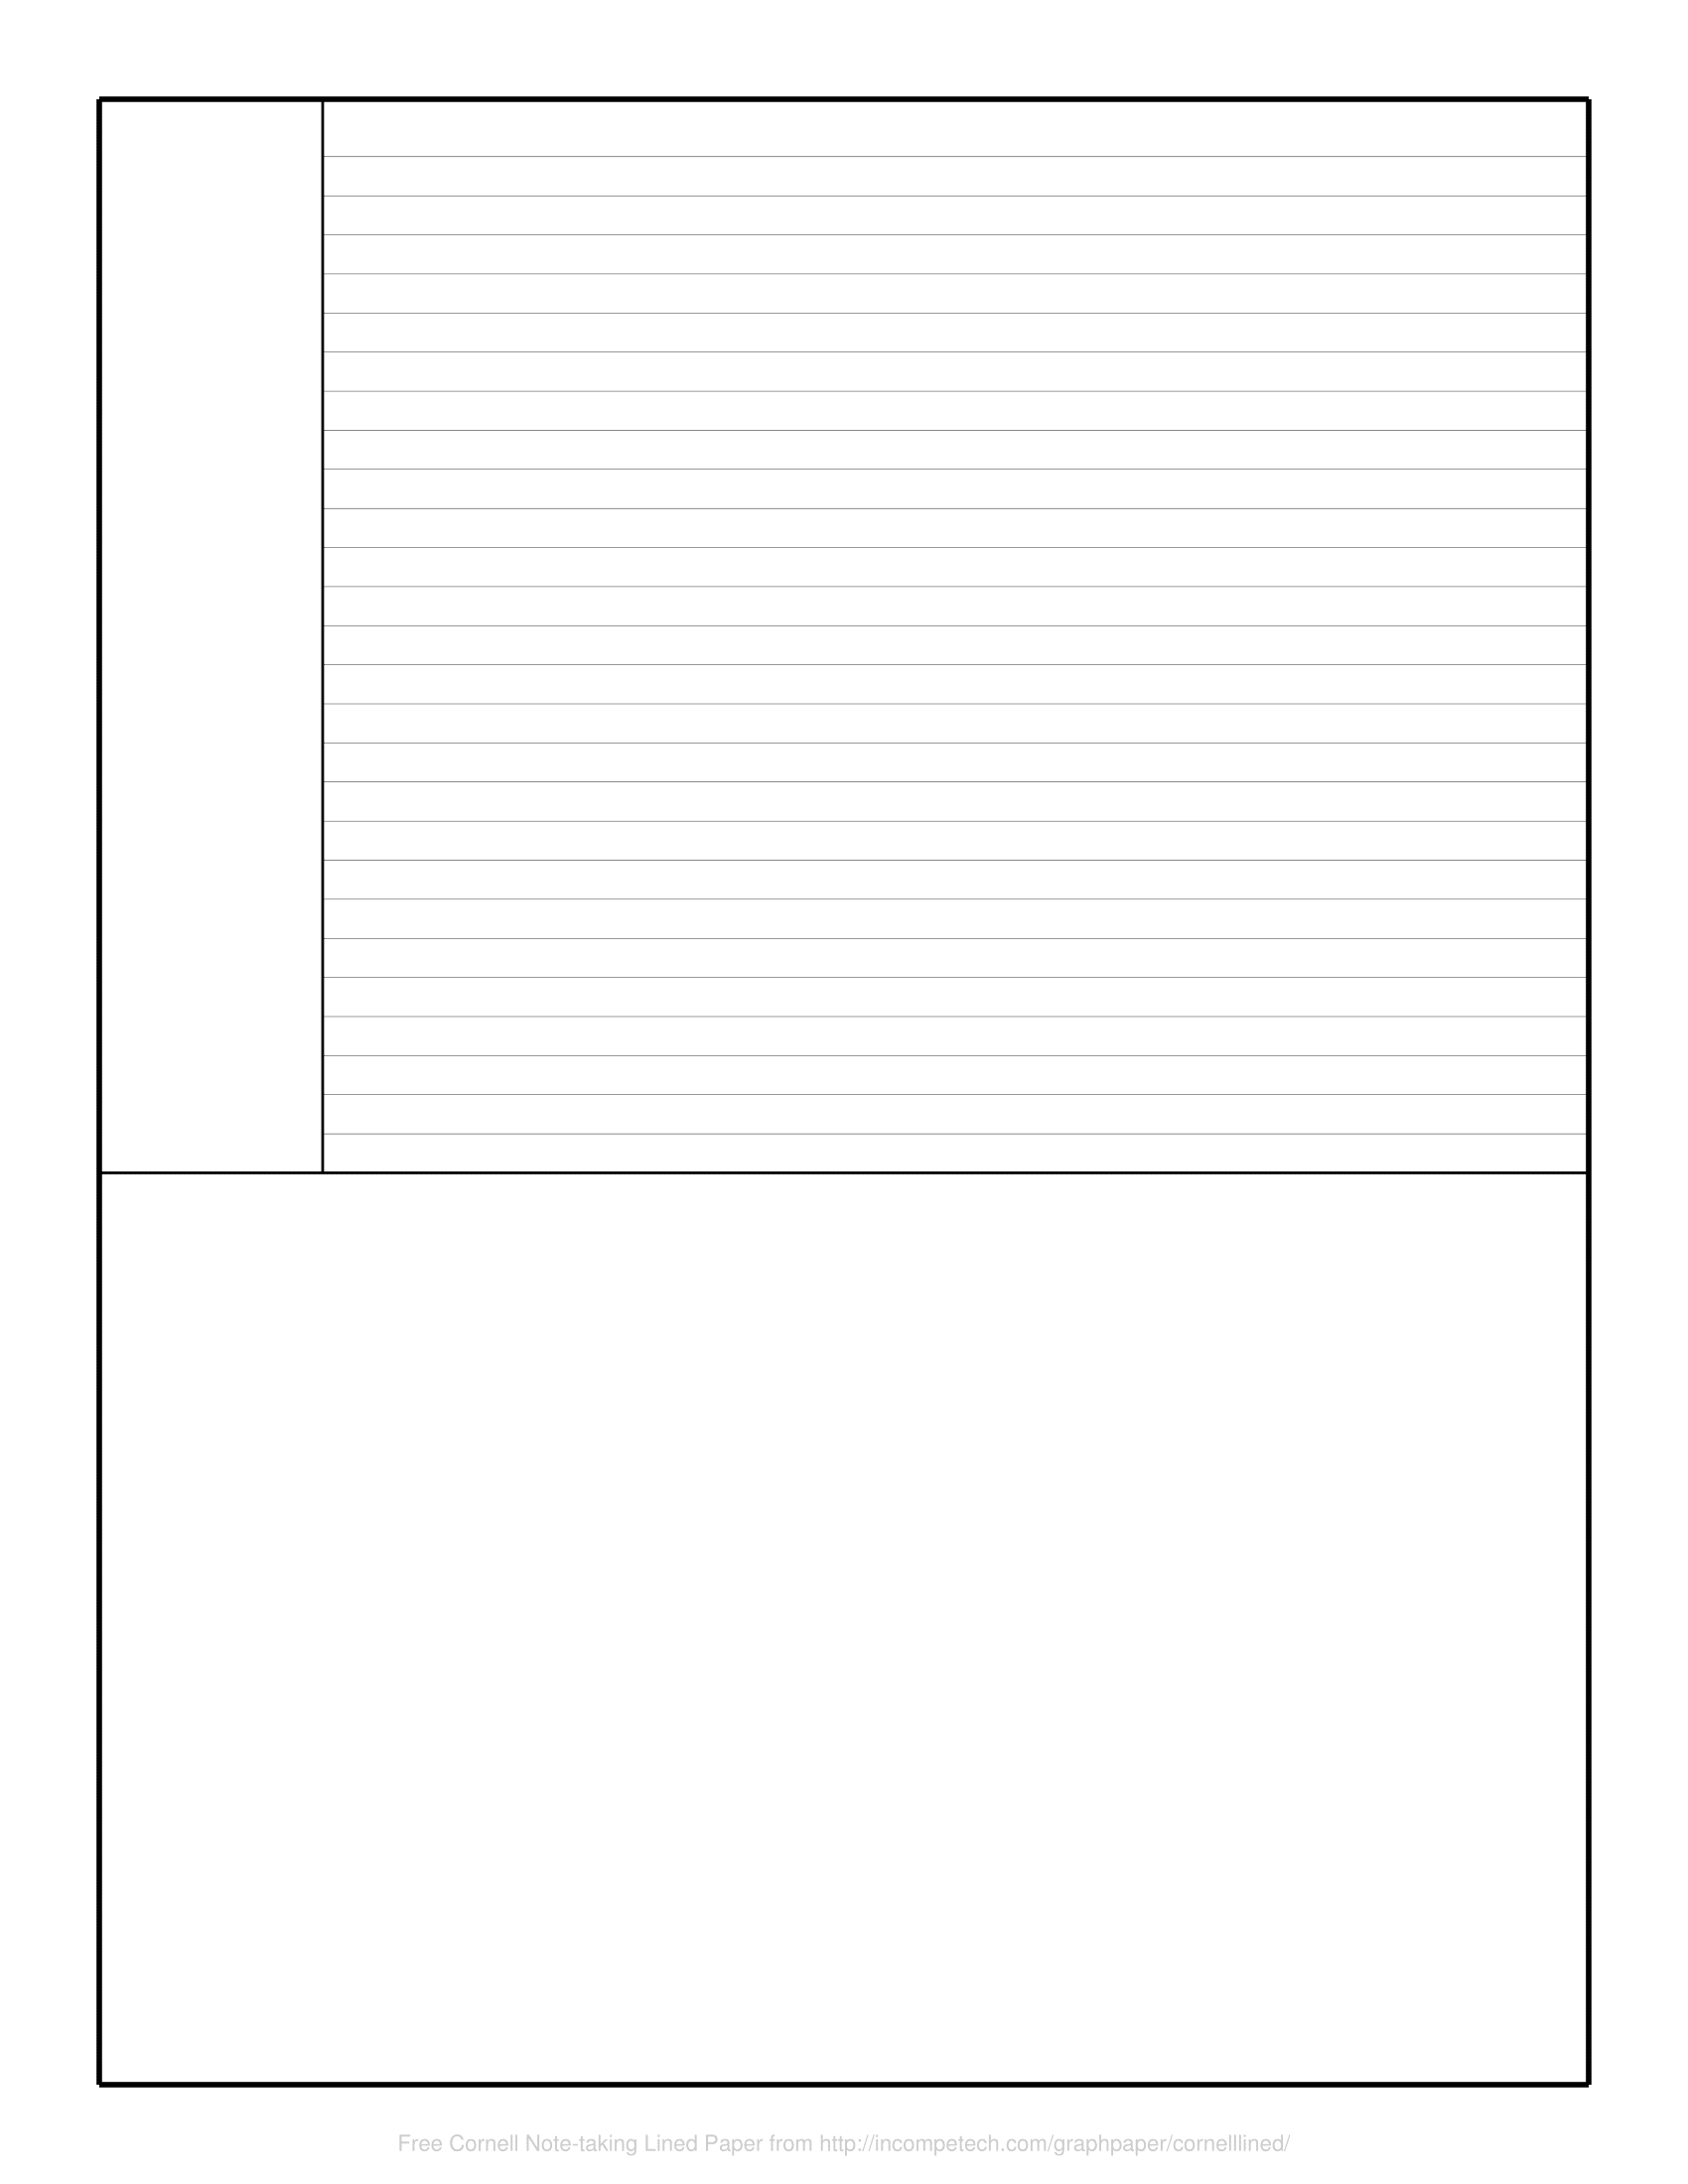 Free Online Graph Paper / Cornell Note Taking Lined Throughout Note Taking Template Pdf